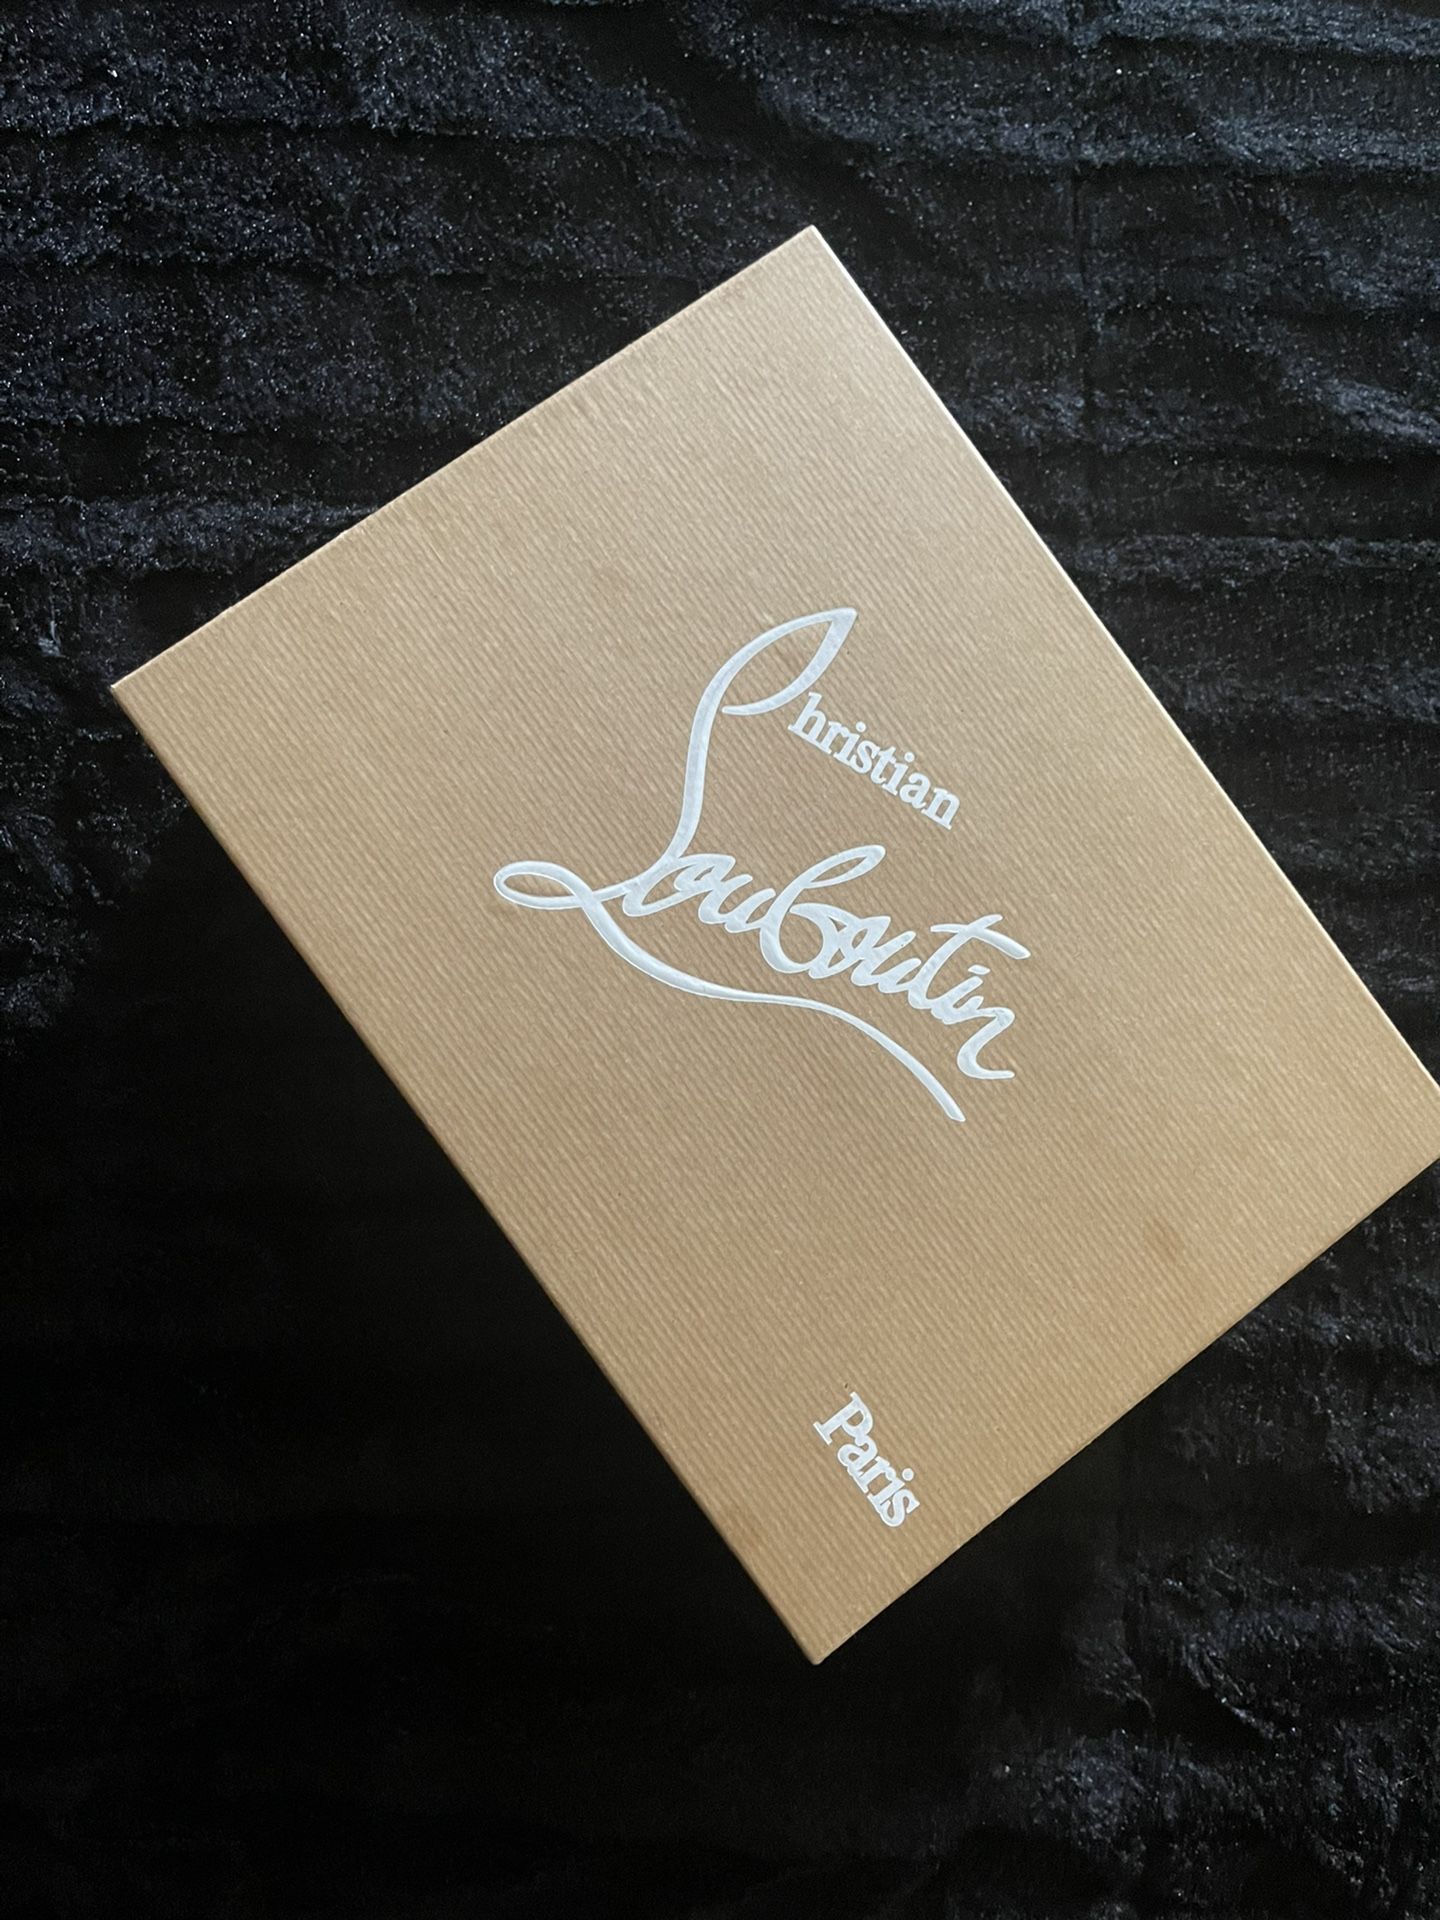 Selling Louboutin “New Very Prive” 120 Patent 